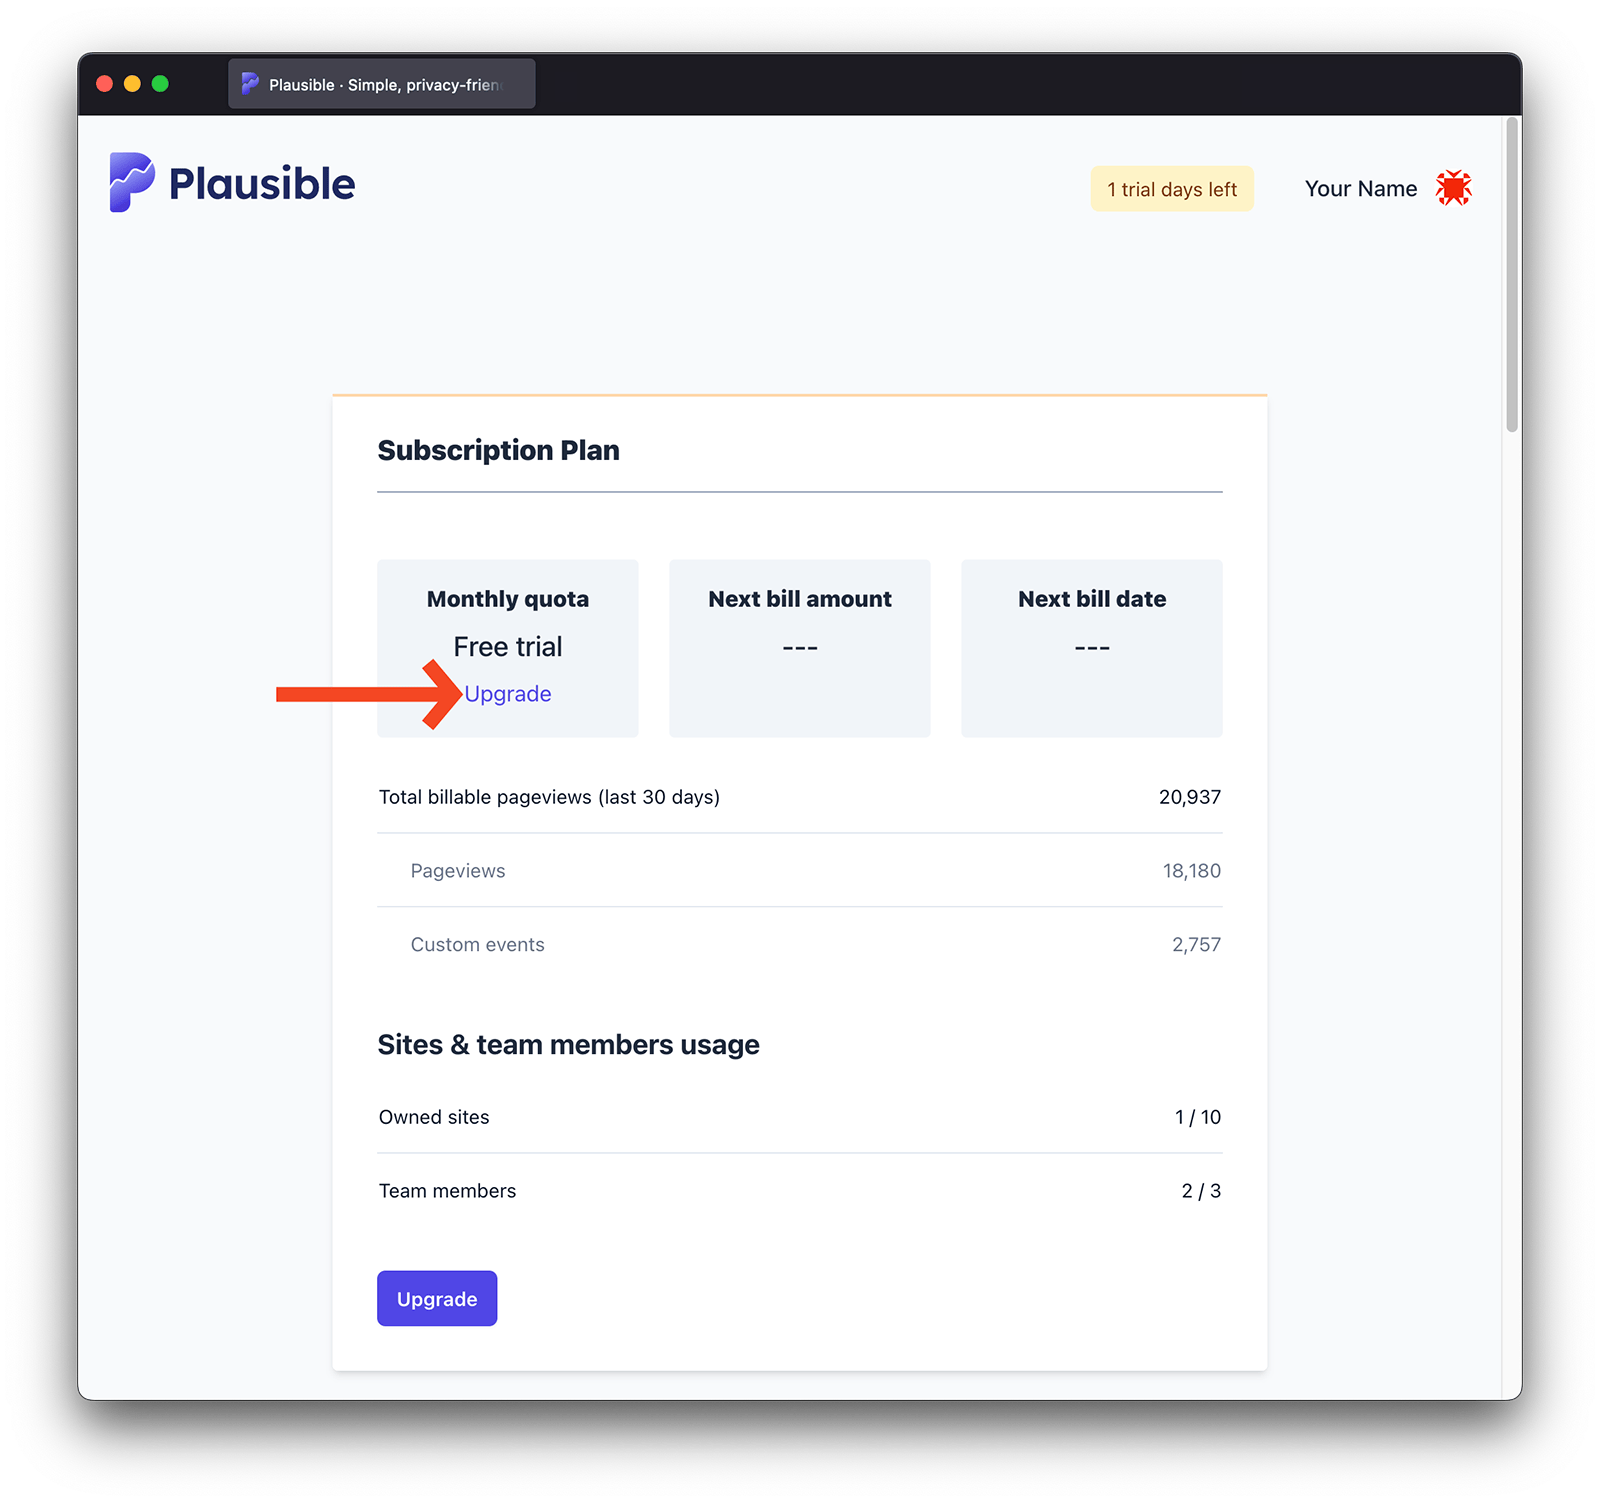 Upgrade your trial account to a paid subscription